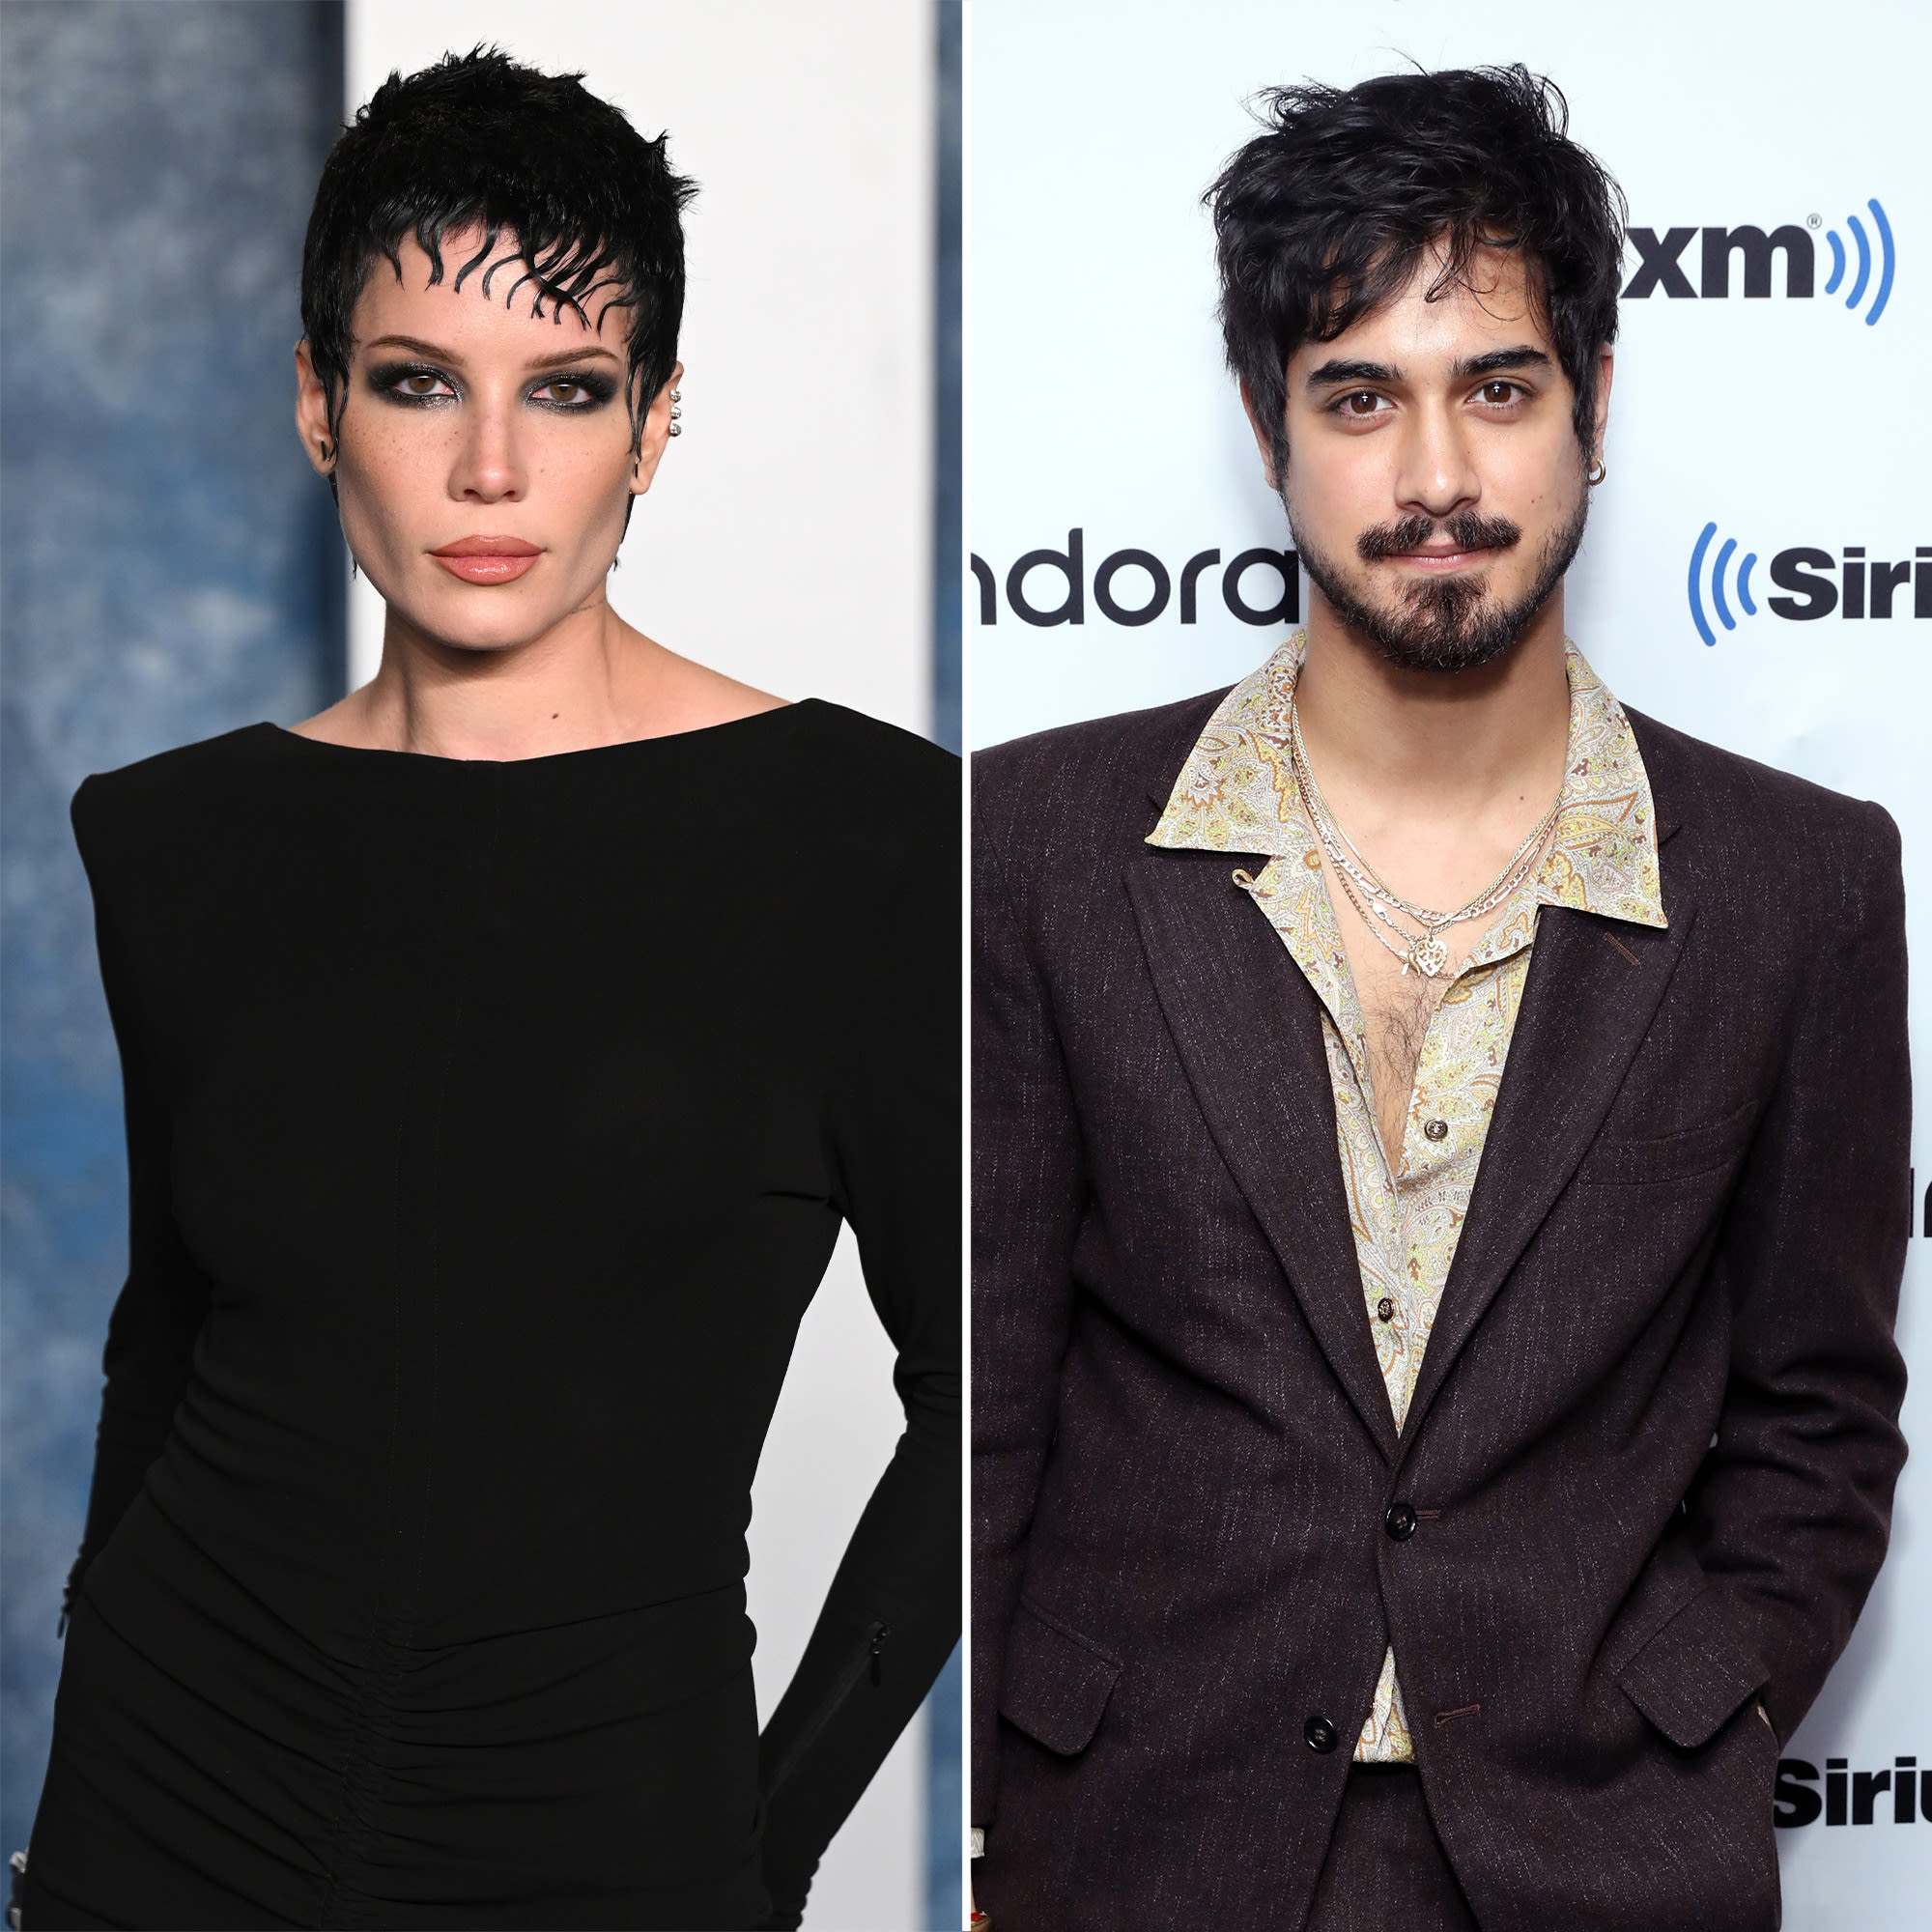 Halsey and Avan Jogia’s Romance Went From Low Key to Instagram Official: Relationship Timeline